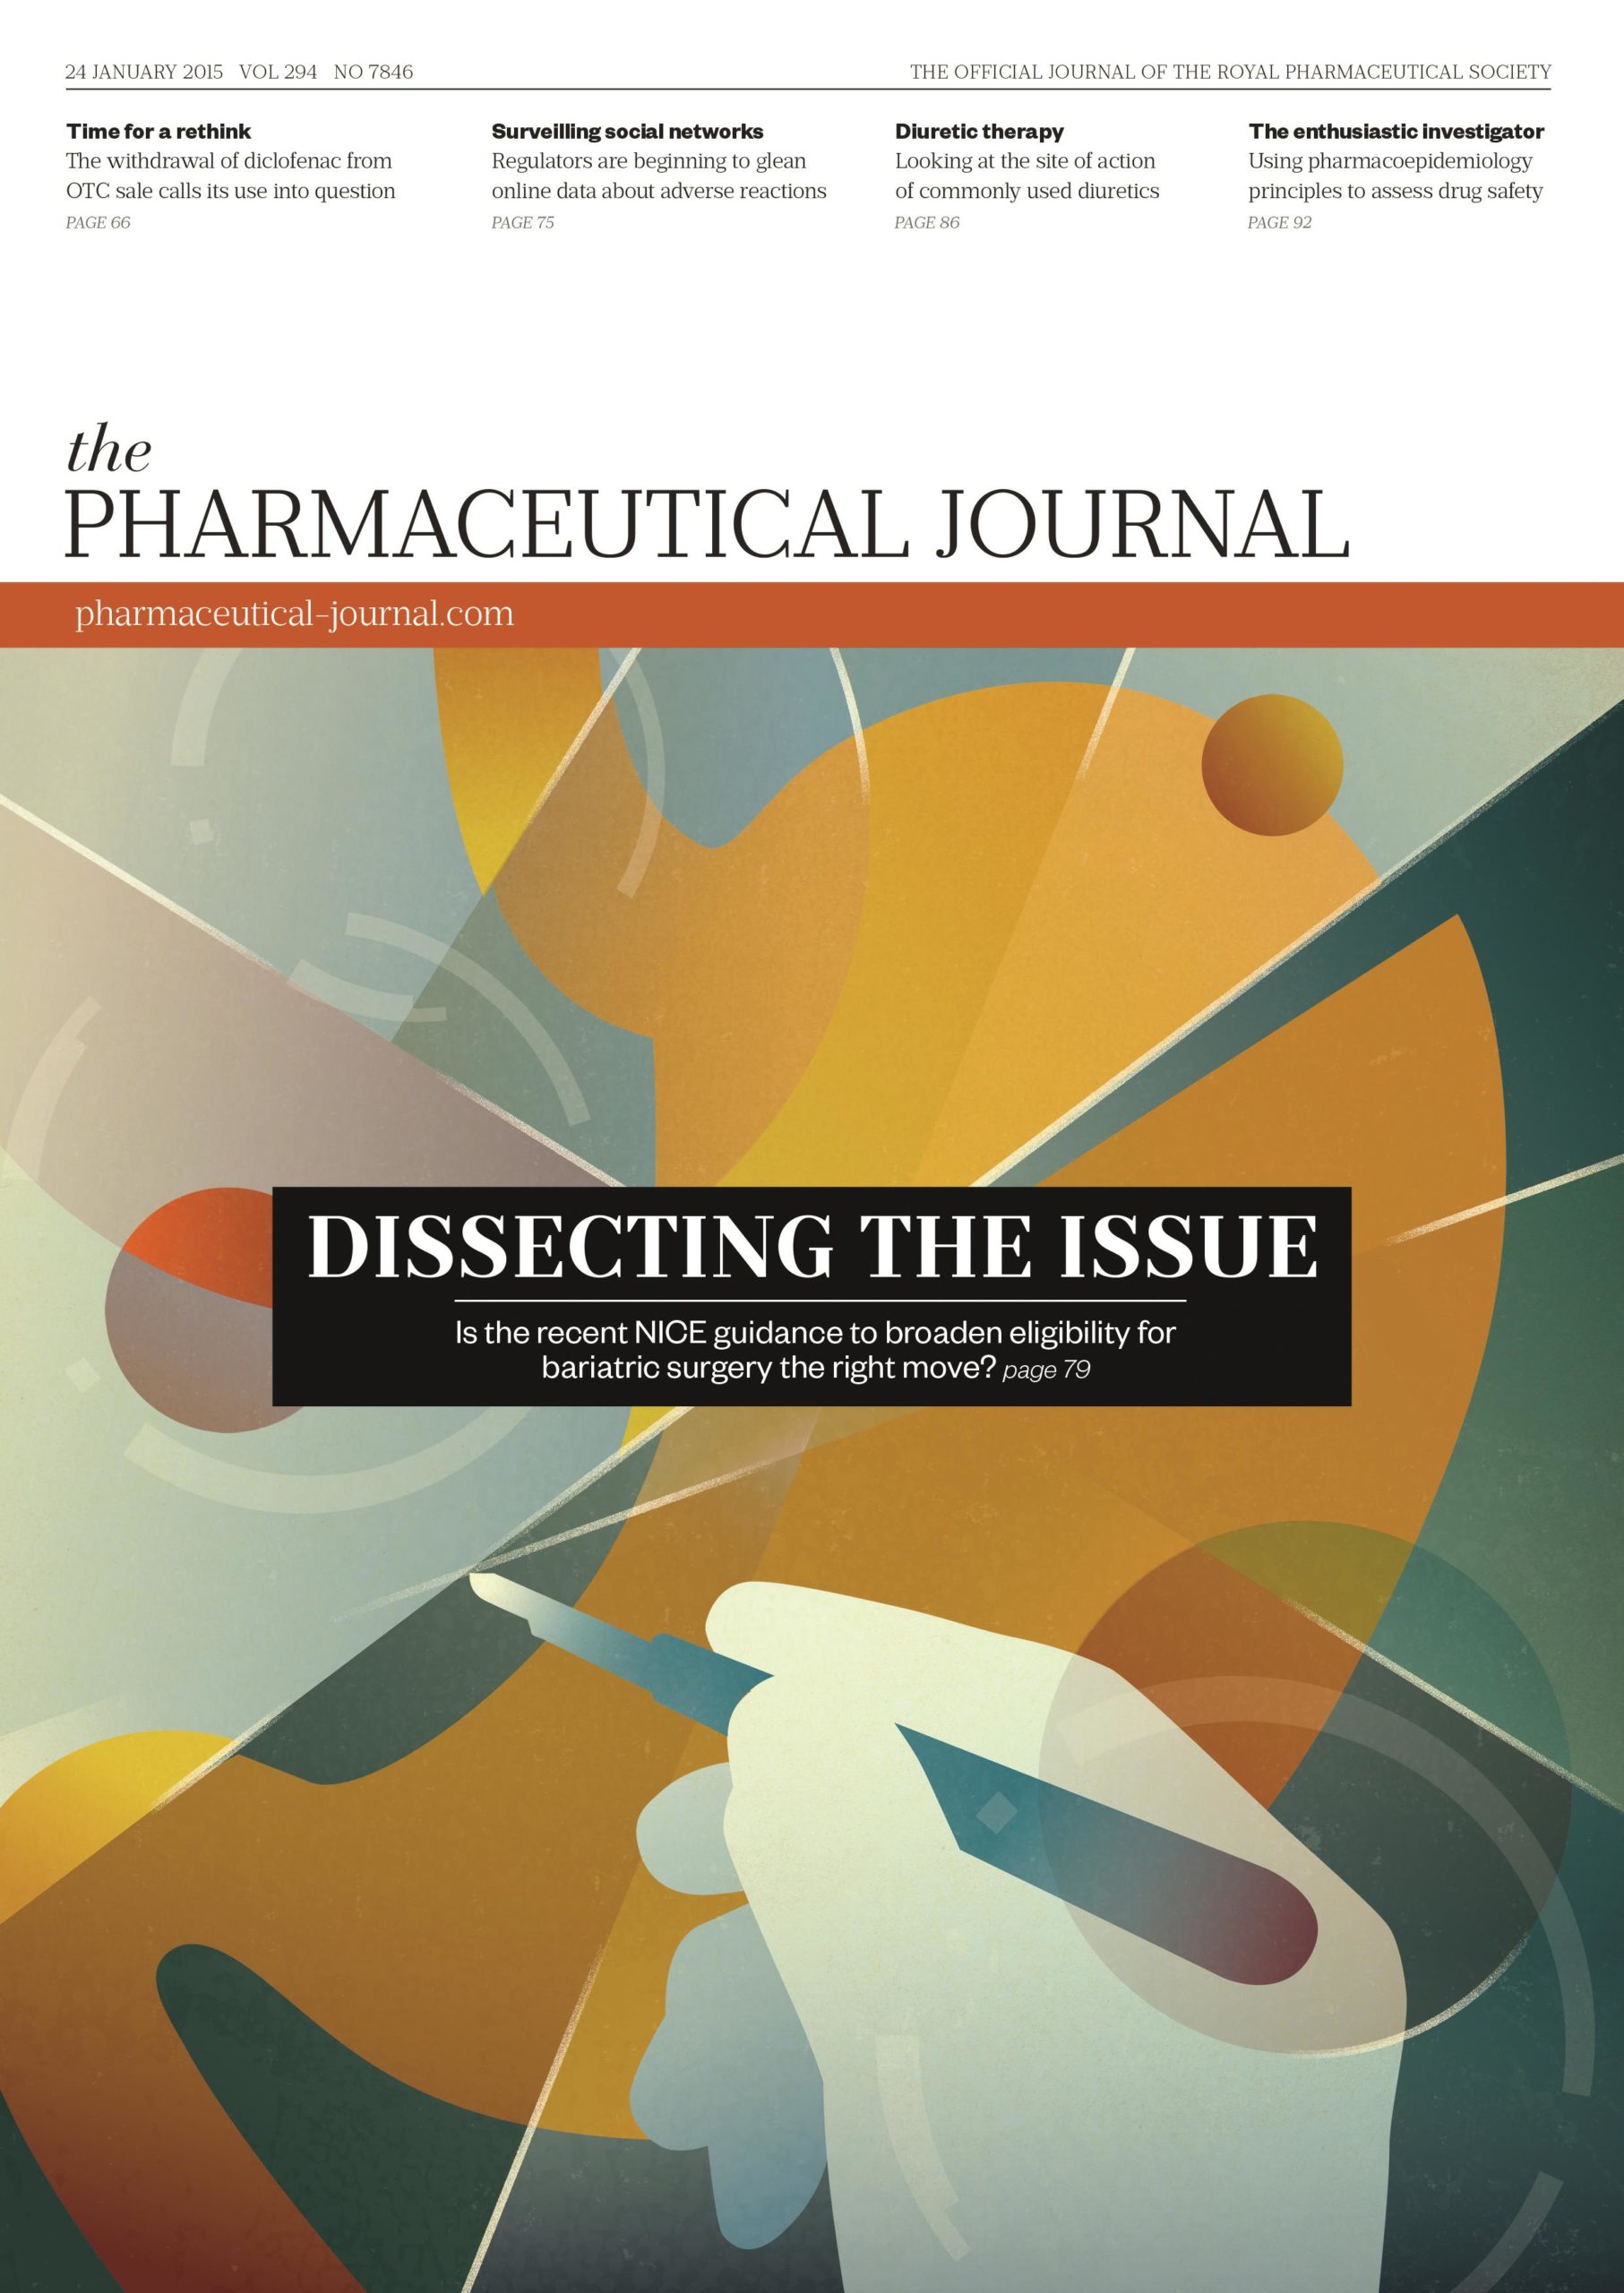 Publication issue cover for PJ, 24 January 2015, Vol 294, No 7846